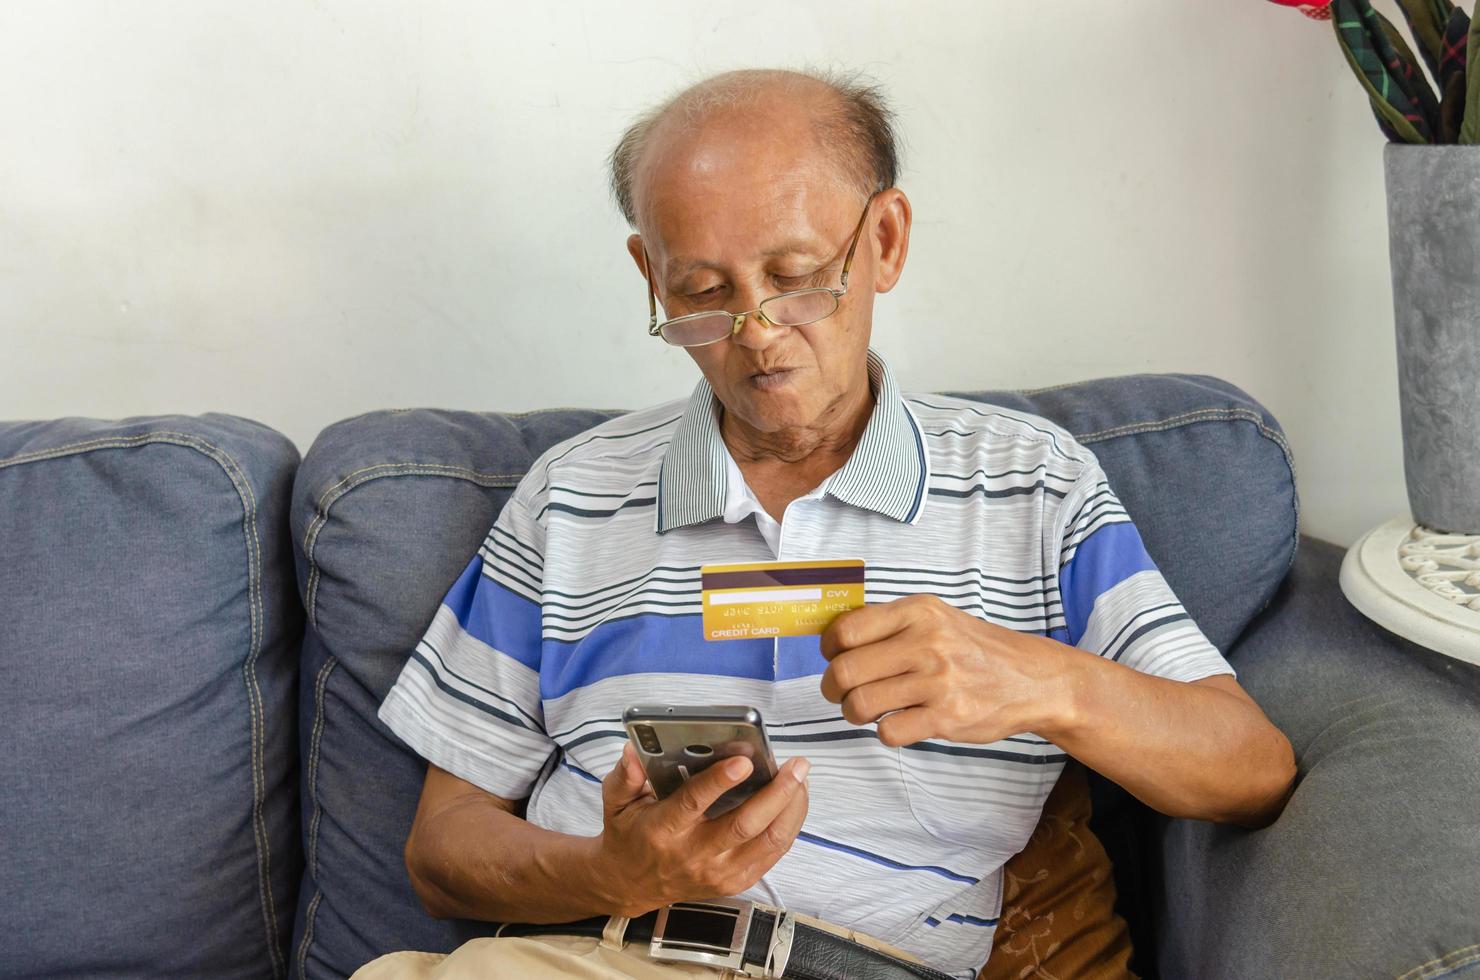 Old man using a credit card to buy something online photo